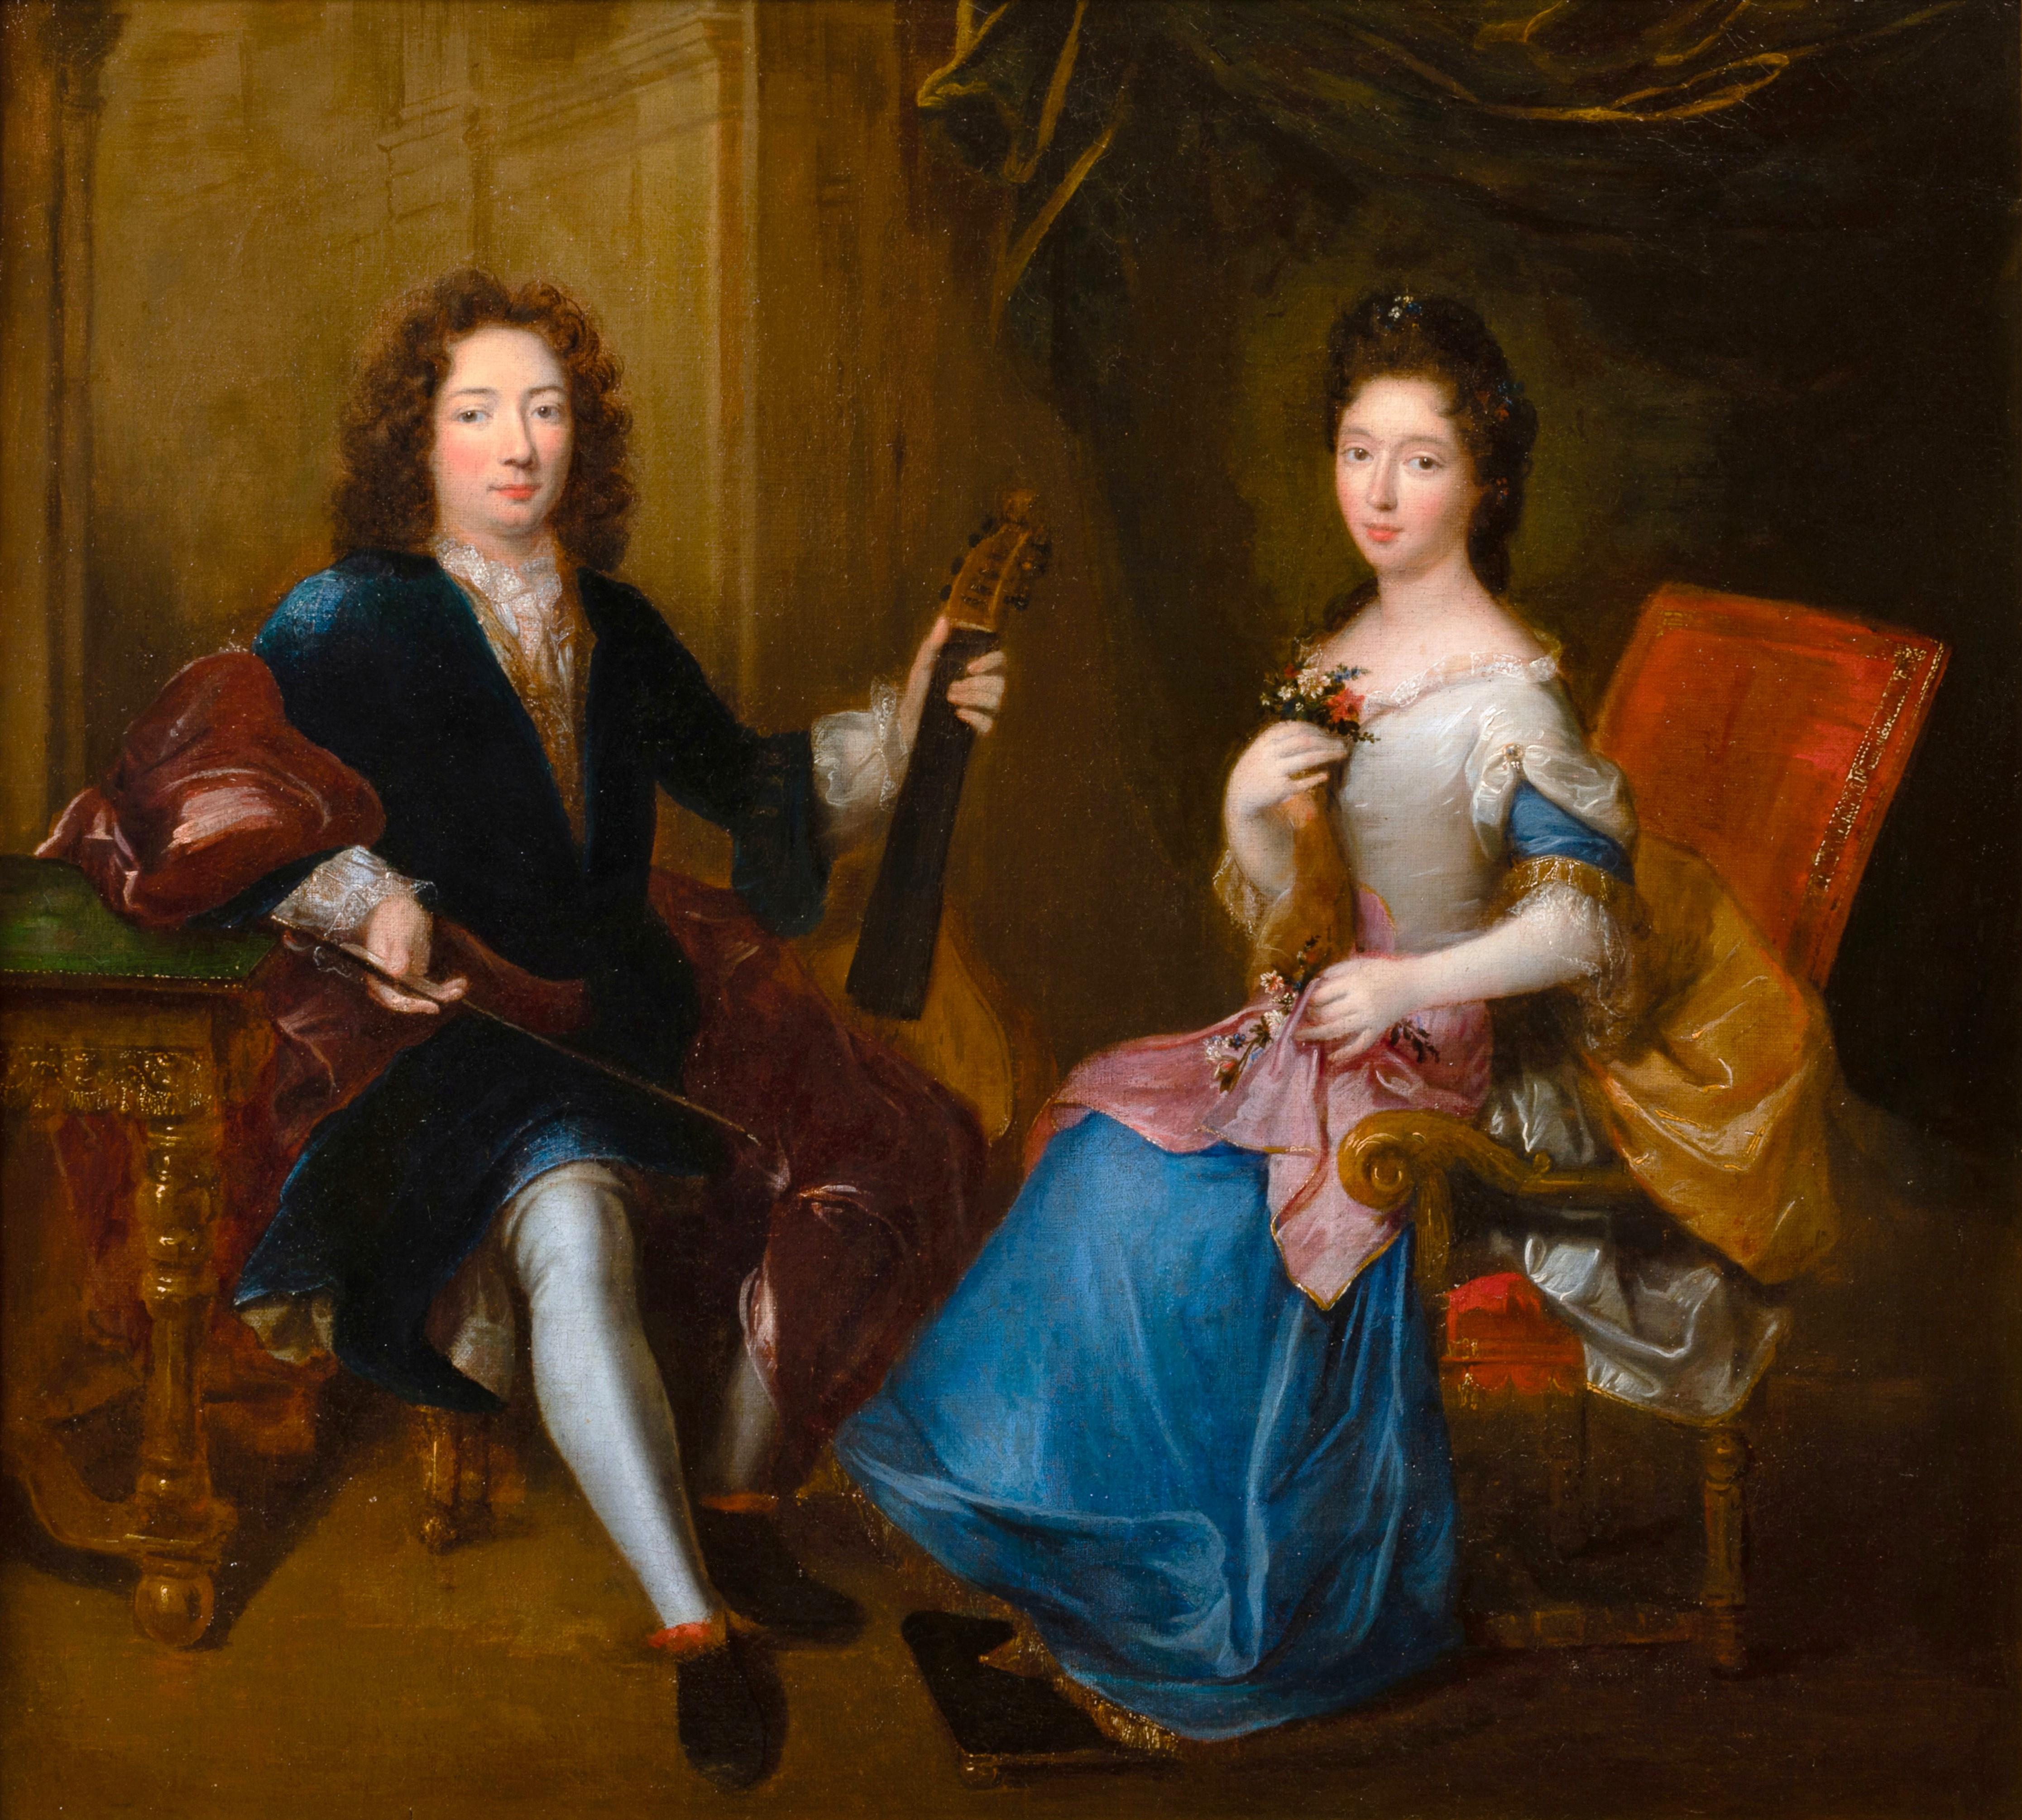 17th c. French school, double portrait of French royal family members - Painting by François de Troy (Toulouse 1645 - Paris 1730)